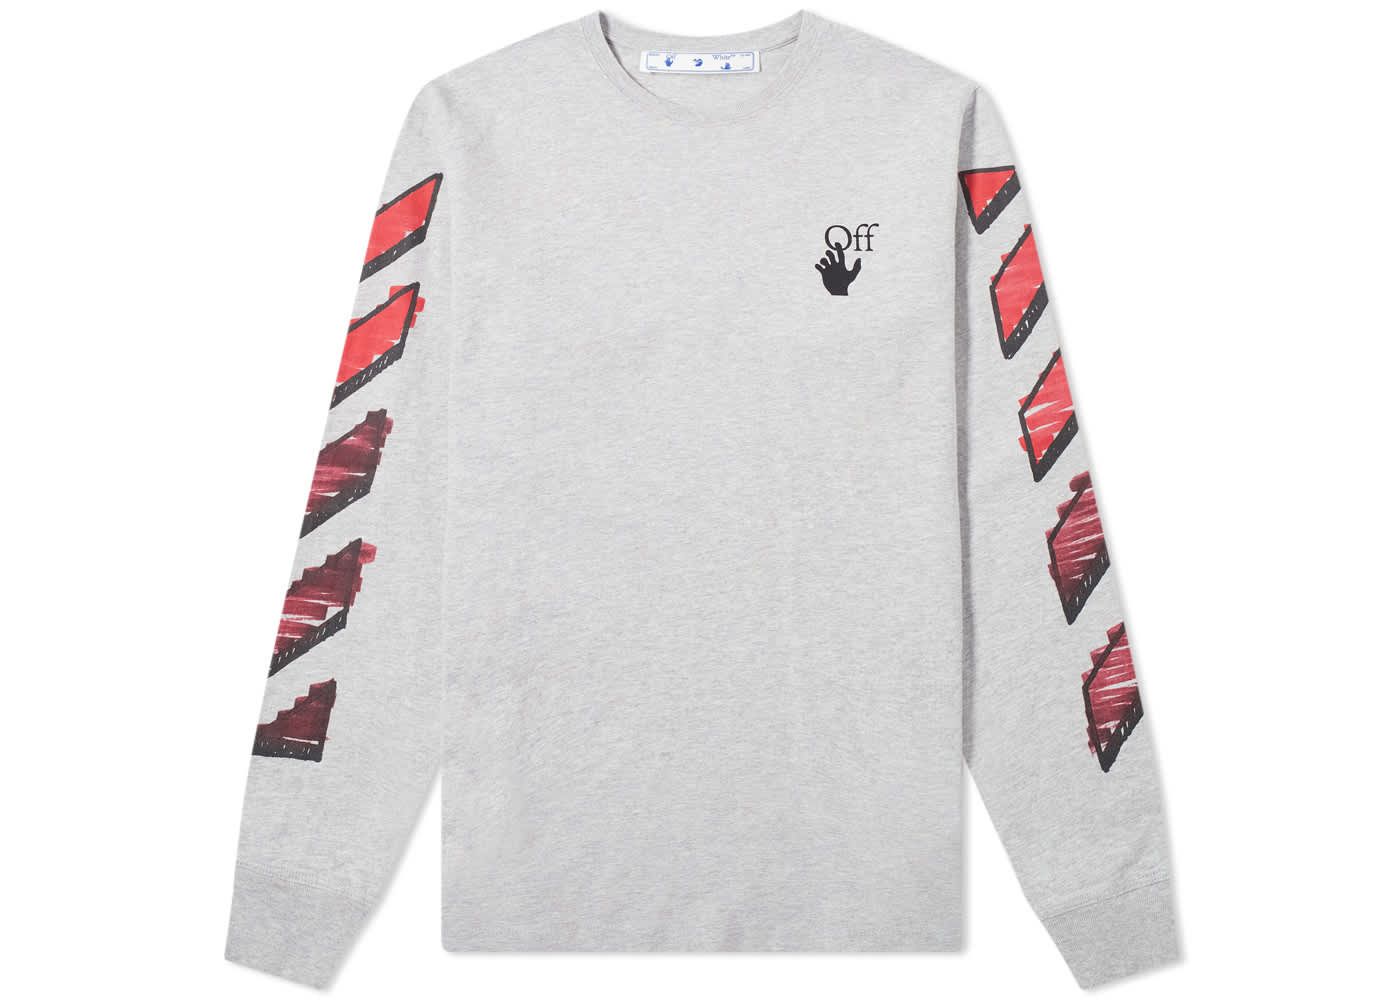 OFF-WHITE Marker Arrows Long Sleeve T-Shirt Grey Red Men's - SS21 - US